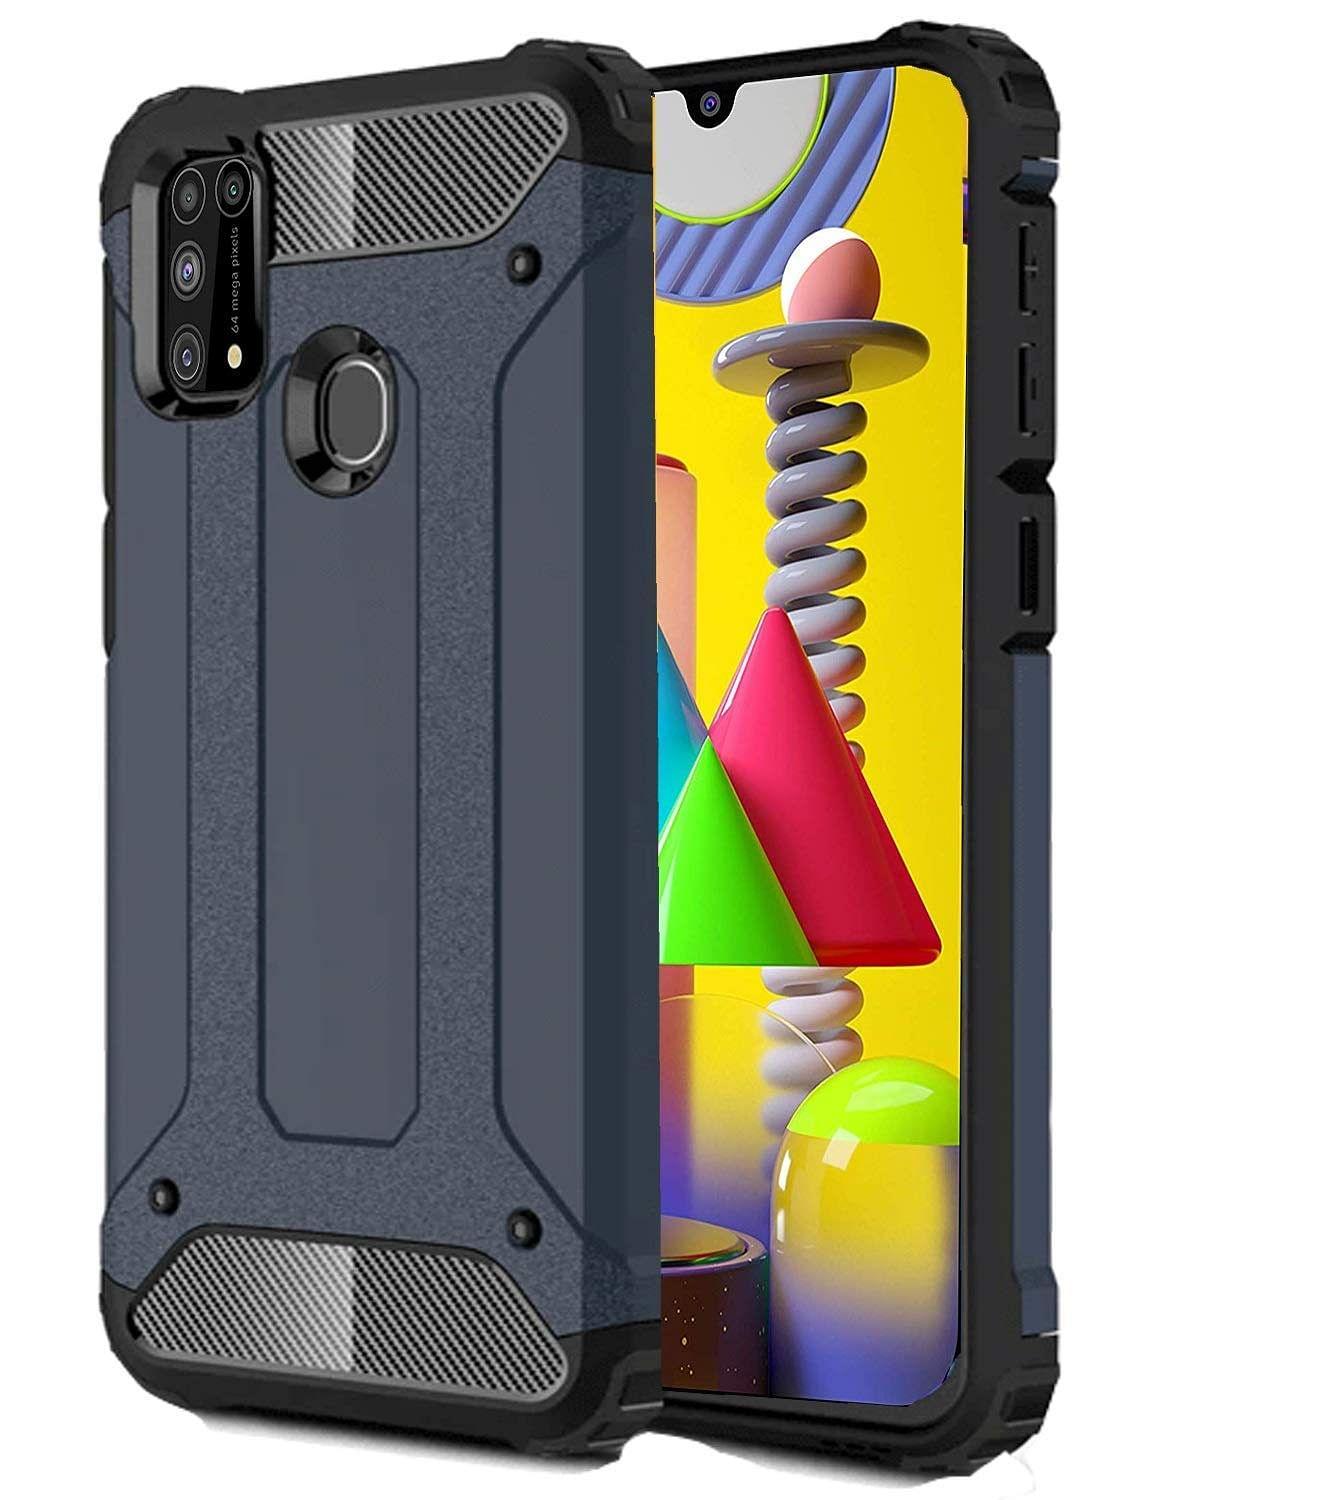 ValueActive Shock Proof 360 Protection Bumper Back Cover Case for Samsung Galaxy M31 / F41 / M31 Prime - ValueActive